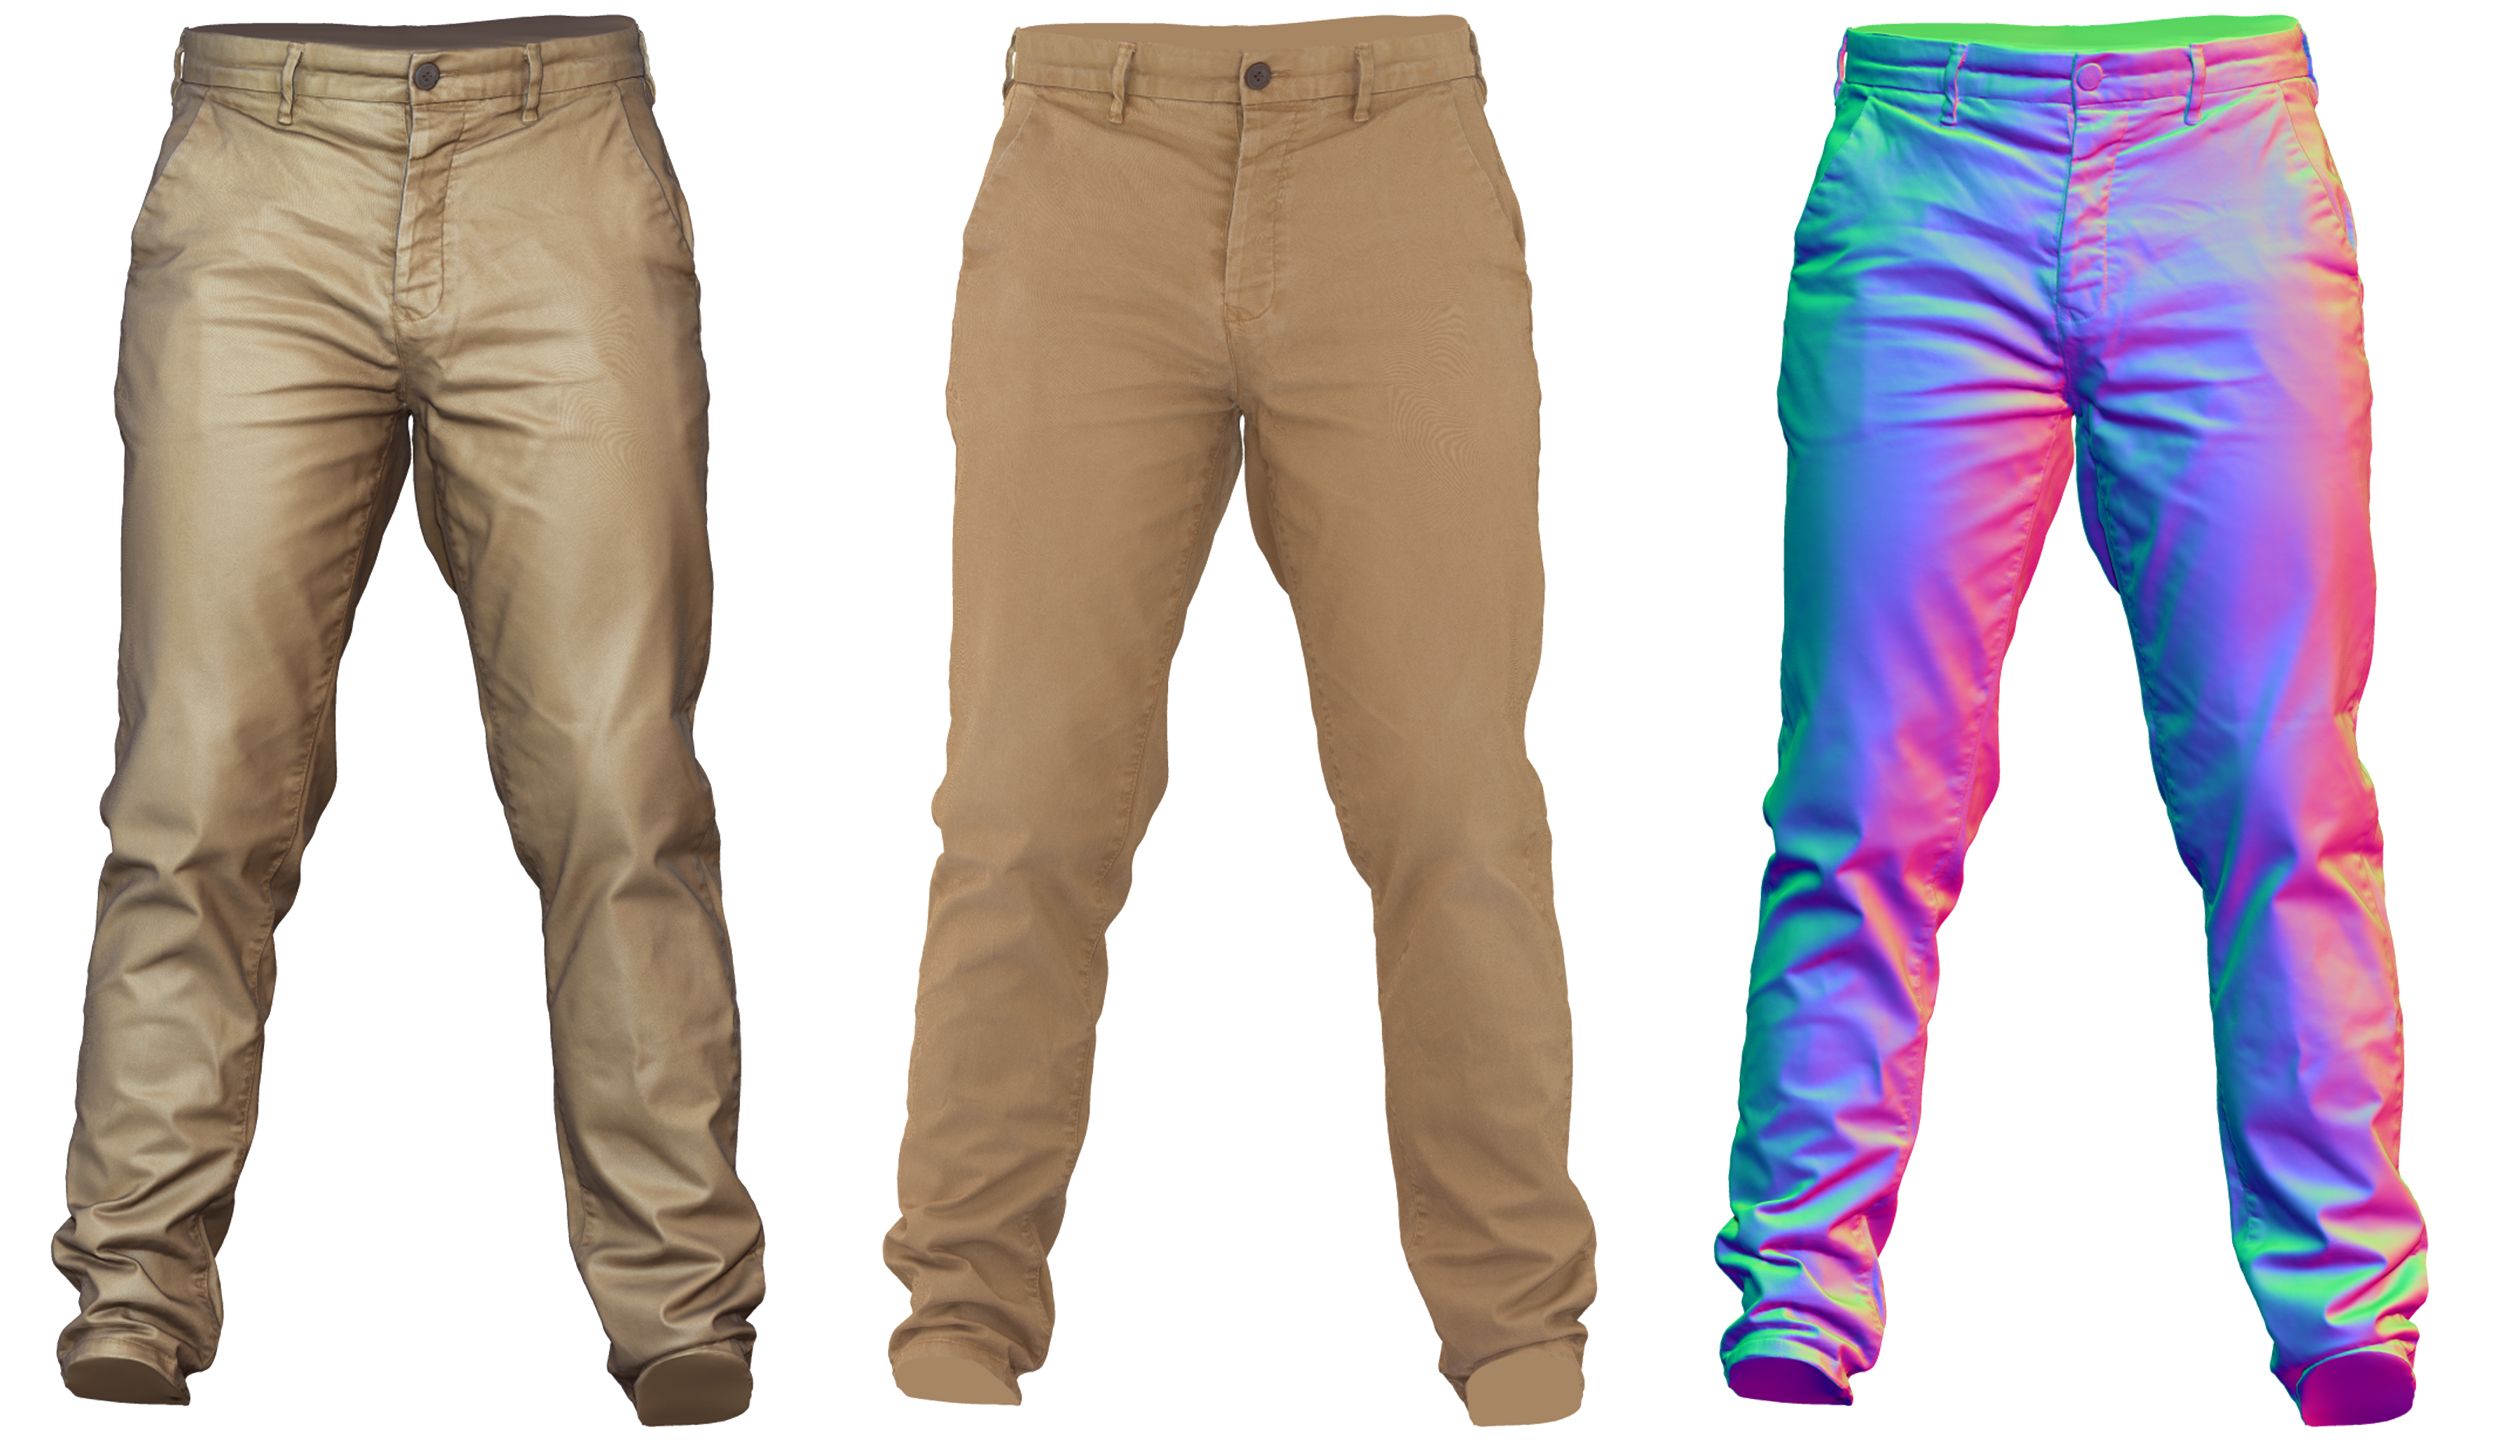 Trousers realtime 3d model download